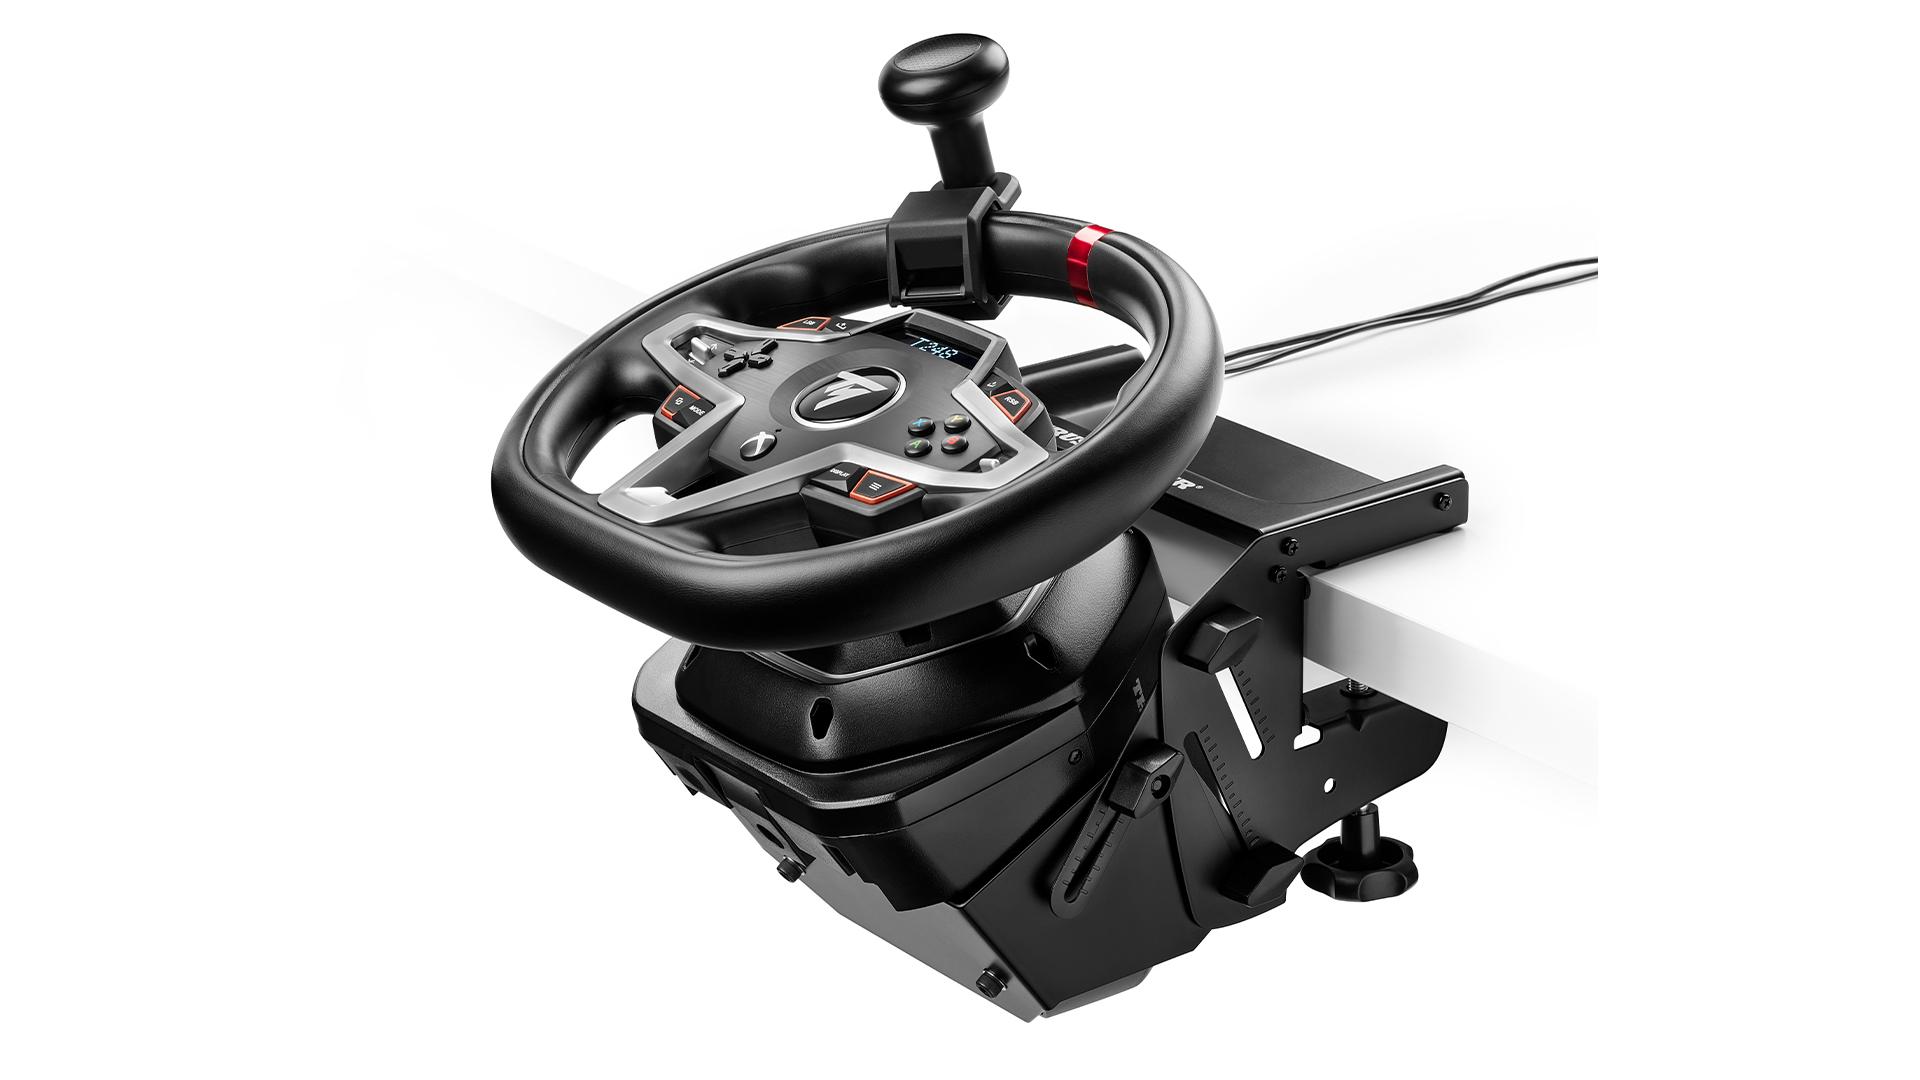 Work up a trucker tan with the new Thrustmaster SimTask Steering